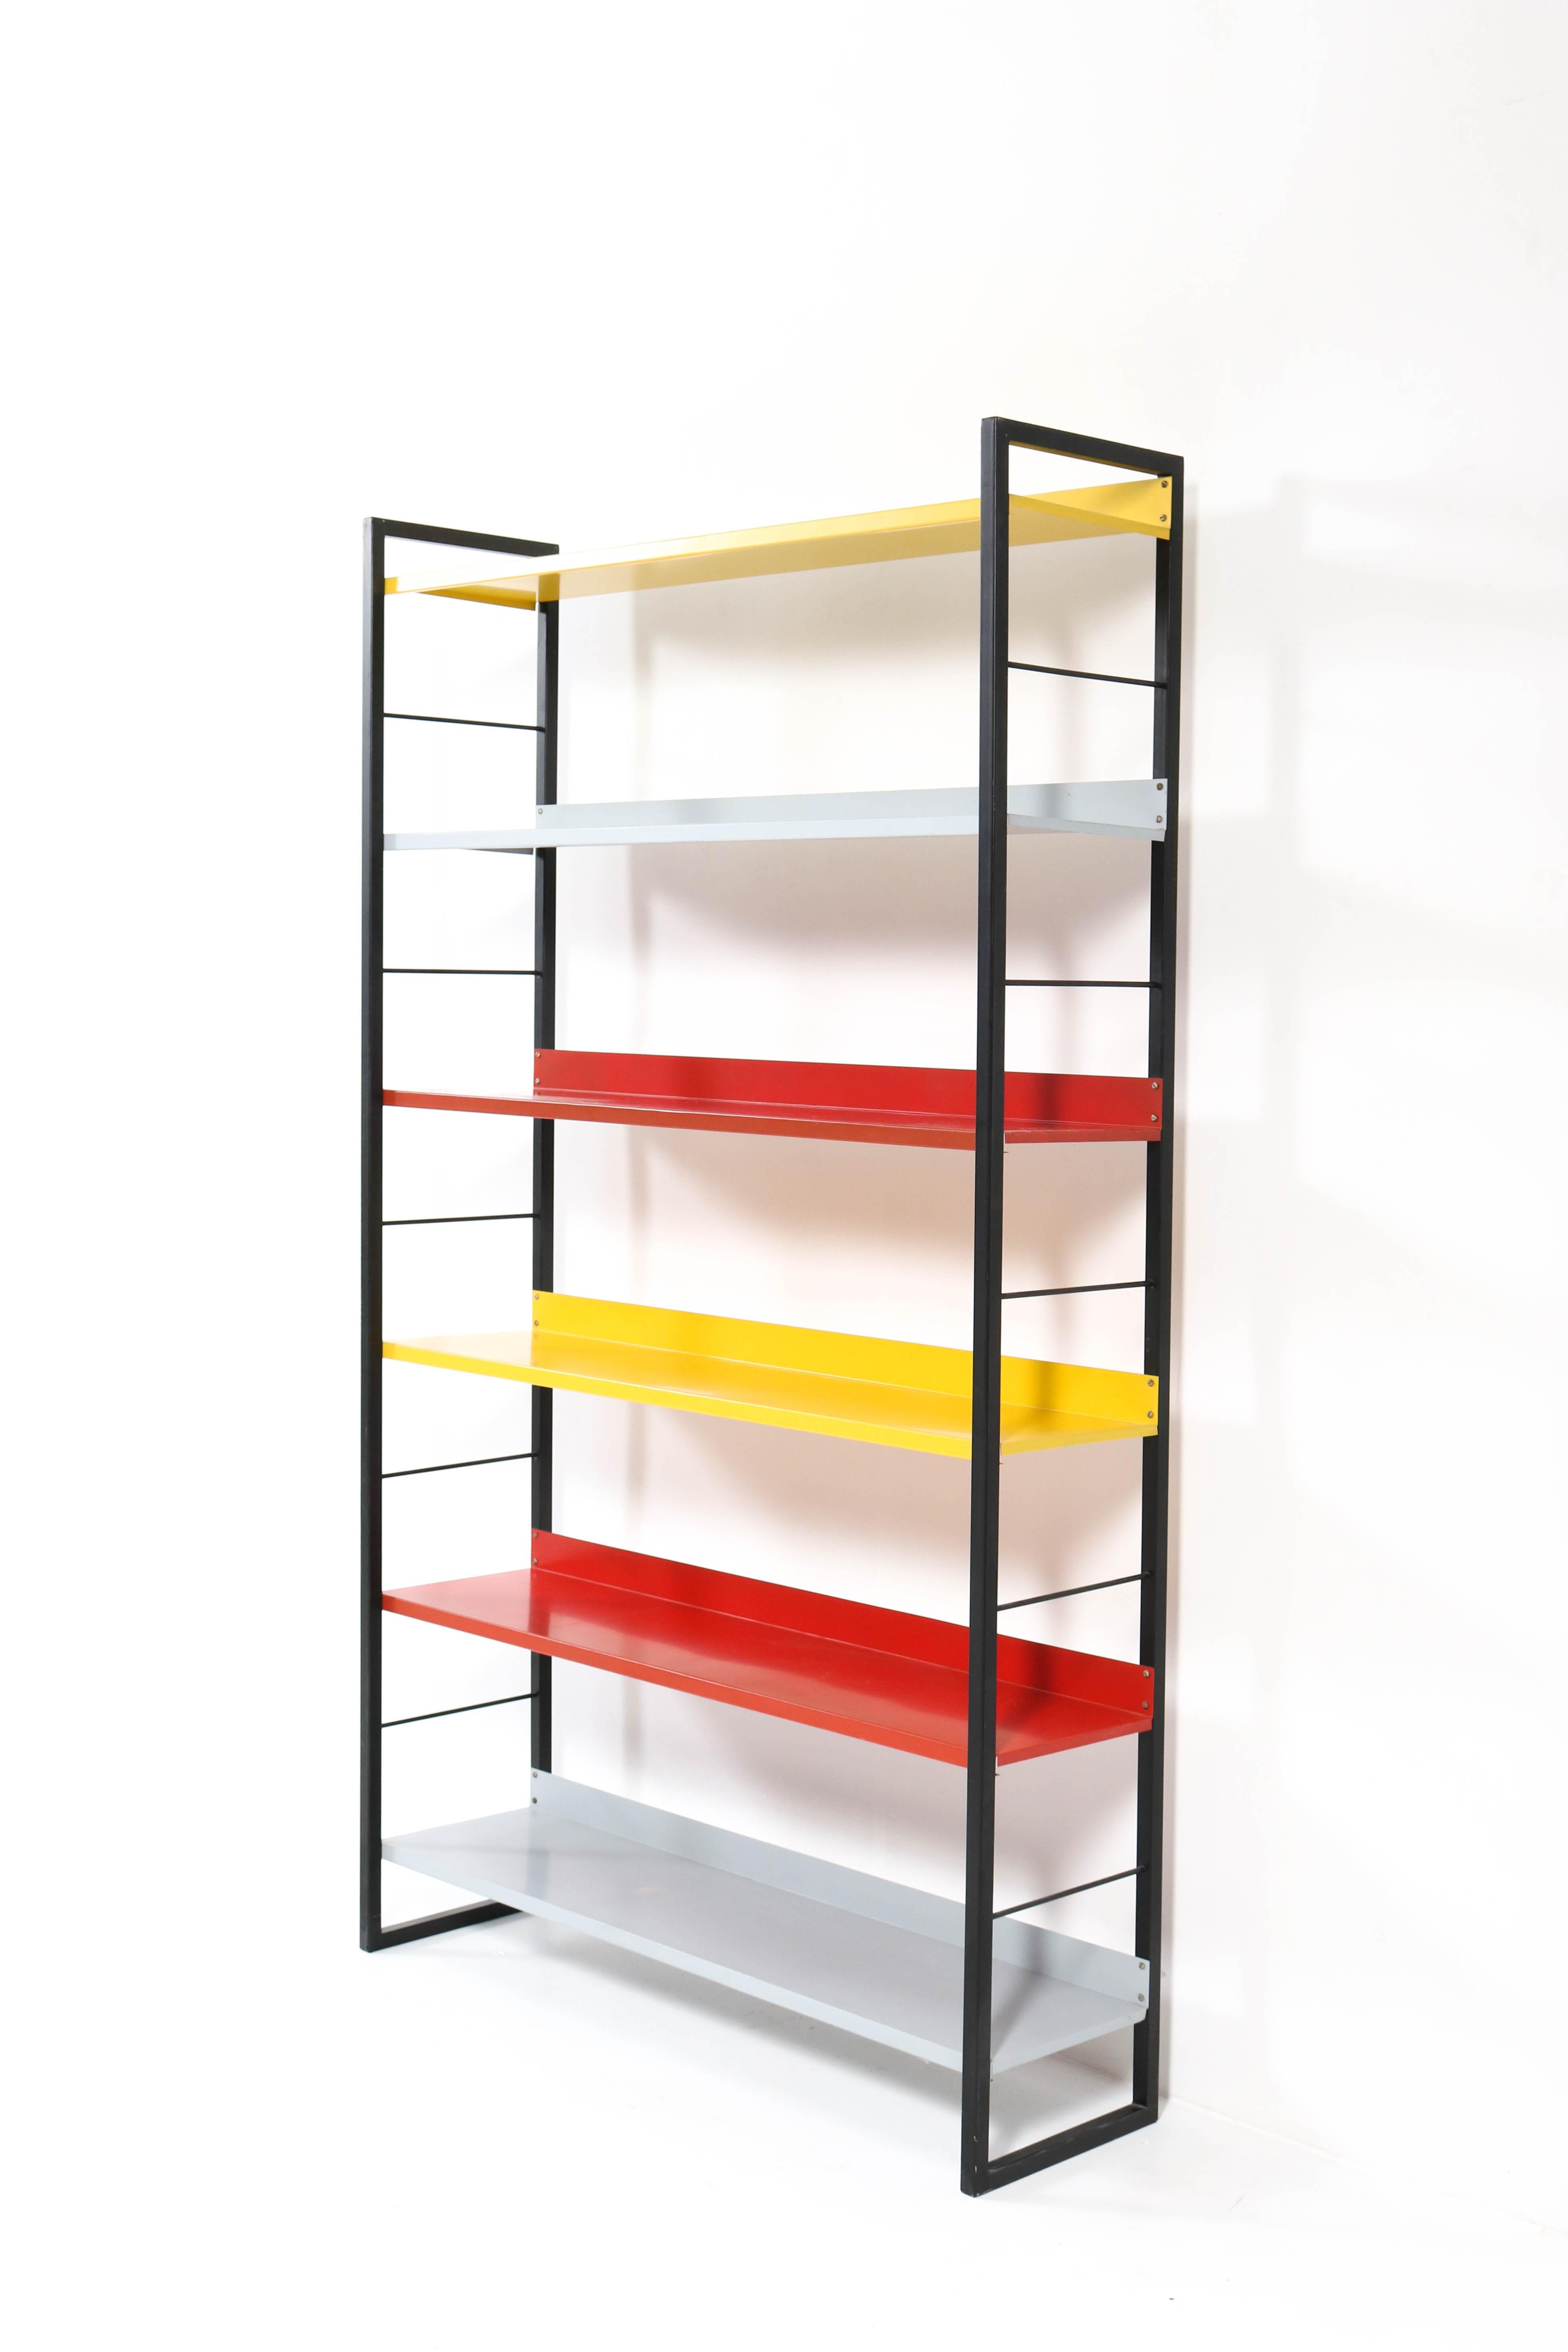 Stunning Mid-Century Modern bookcase.
Design by Adriaan Dekker for Tomado.
Striking Dutch design from the 1950s.
Black lacquered metal frame with yellow, red and grey lacquered metal shelves.
In very good condition with minor wear consistent